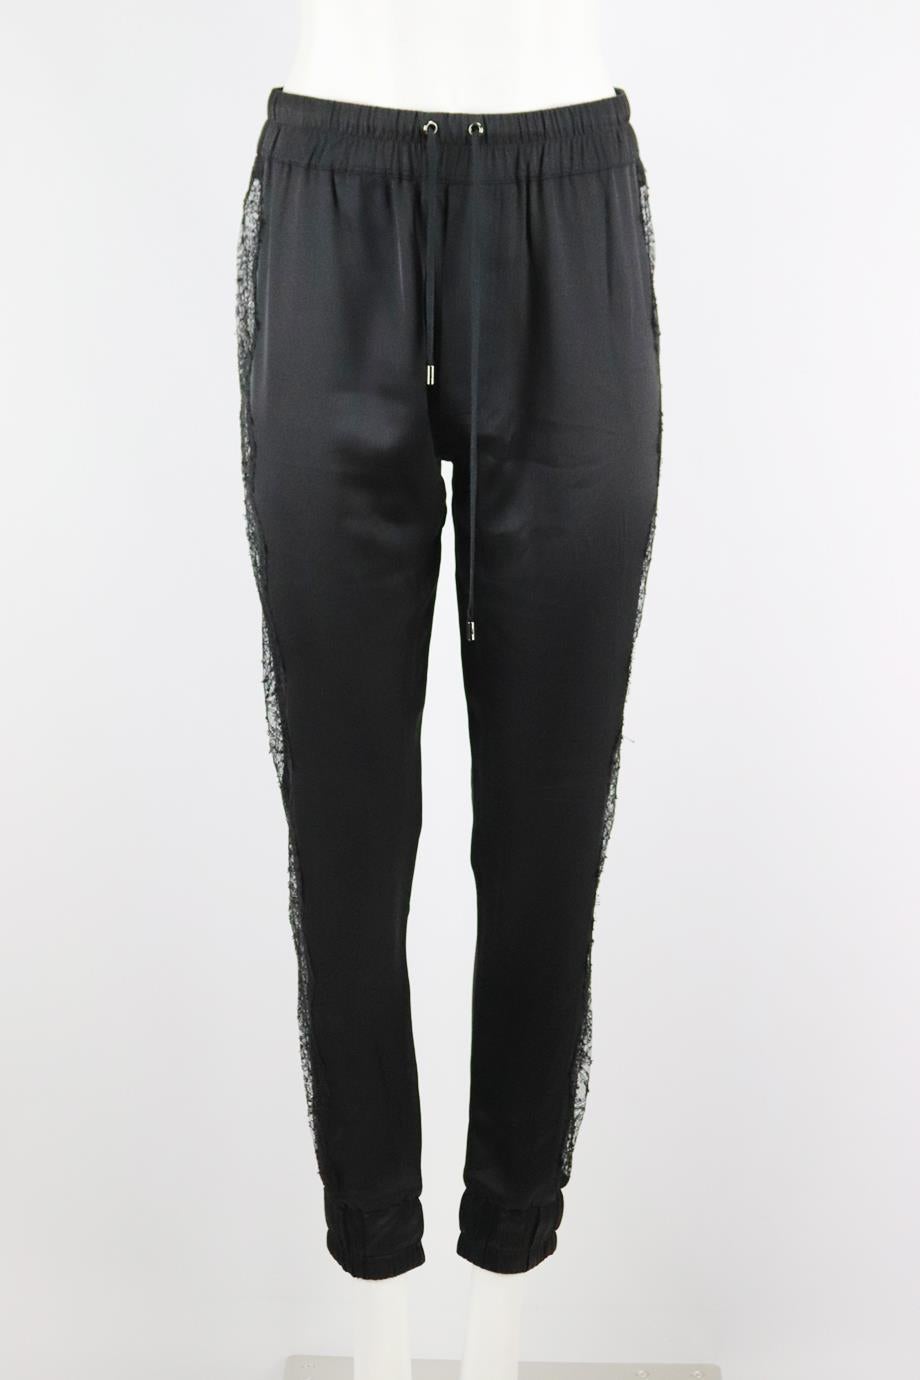 Tom Ford lace trimmed silk tapered pants. Black. Pull on. 100% Silk; fabric2: 53% viscose, 47% polyamide. Size: IT 38 (UK 6, US 2, FR 34). Waist: 28 in. Hips: 40 in. Length: 39 in. Inseam: 28.5 in. Rise: 13.6 in. Very good condition - No sign of